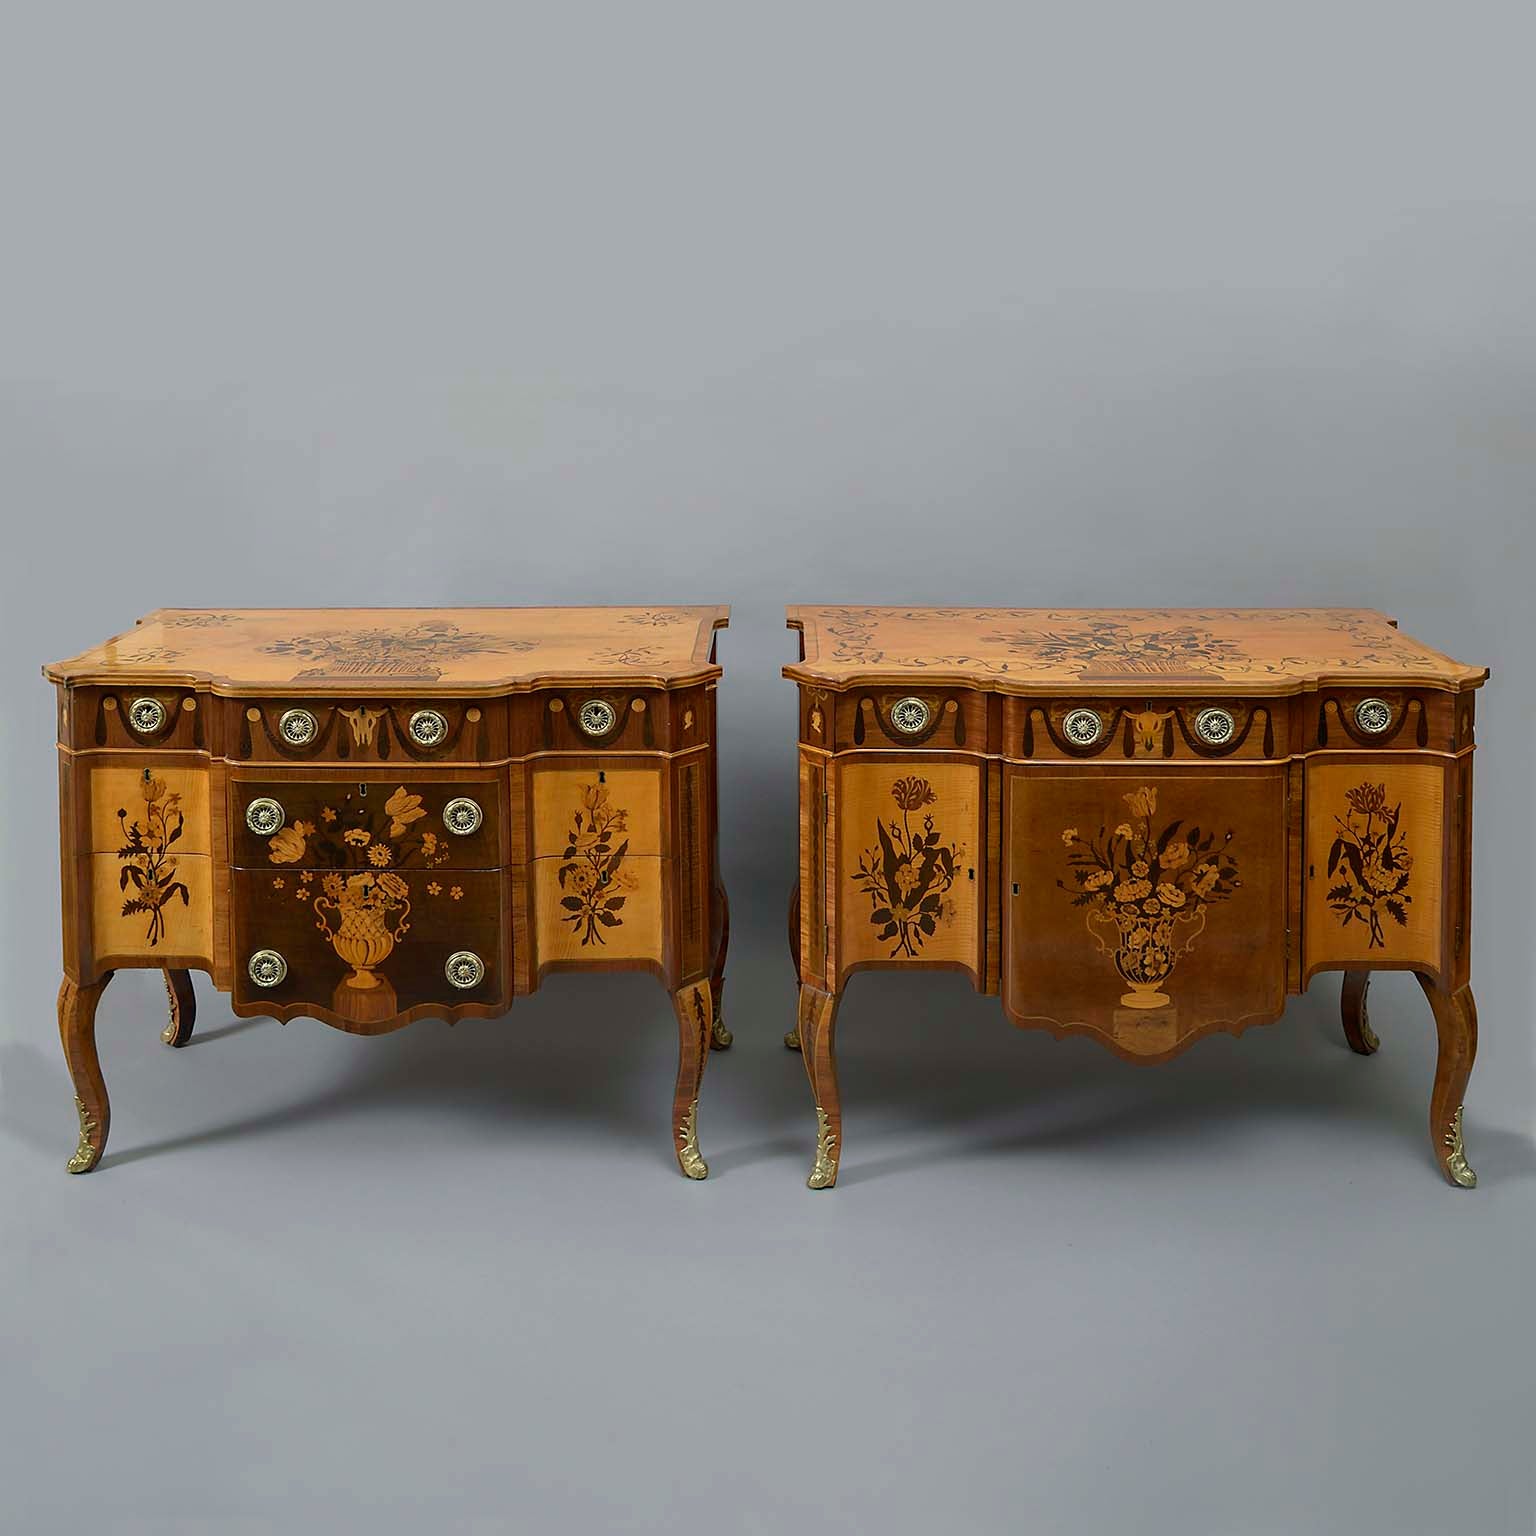 AN IMPORTANT MATCHED PAIR OF IRISH GEORGE III SYCAMORE, AMARANTH AND MARQUETRY COMMODES